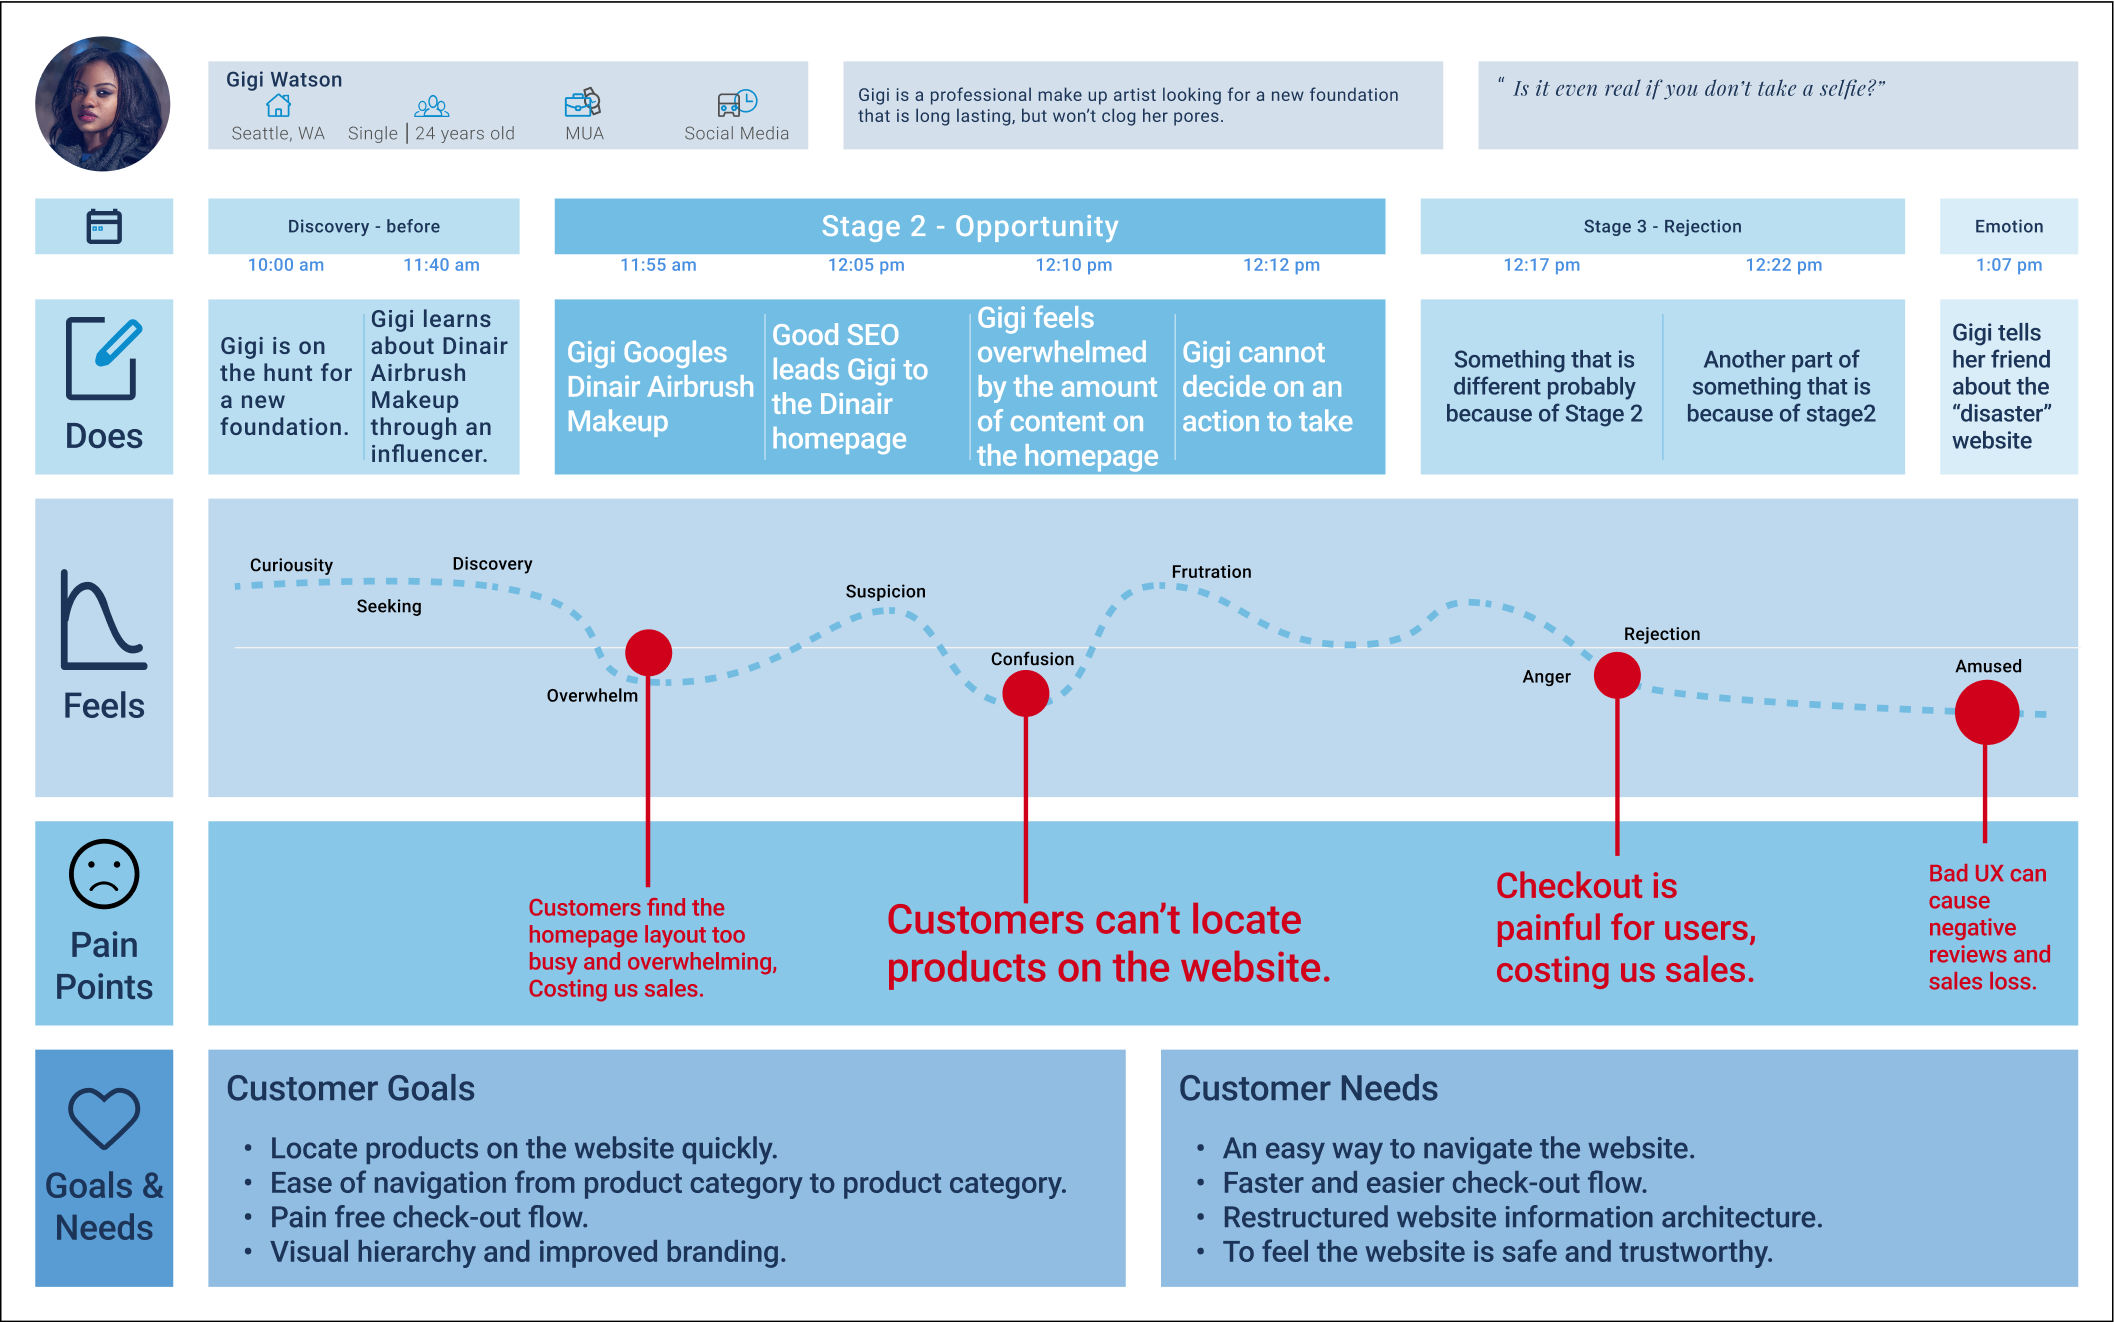 An illustrative image showcasing the comprehensive user journey map for Dinair Airbrush Makeup in the UX case study. The visual outlines the key touchpoints and interactions customers have with the brand, from discovery and exploration to purchase and post-sale engagement. The user journey map provides insights into the customer experience, helping to identify pain points, opportunities for improvement, and areas to enhance overall satisfaction and loyalty throughout the Dinair Airbrush Makeup interaction lifecycle.